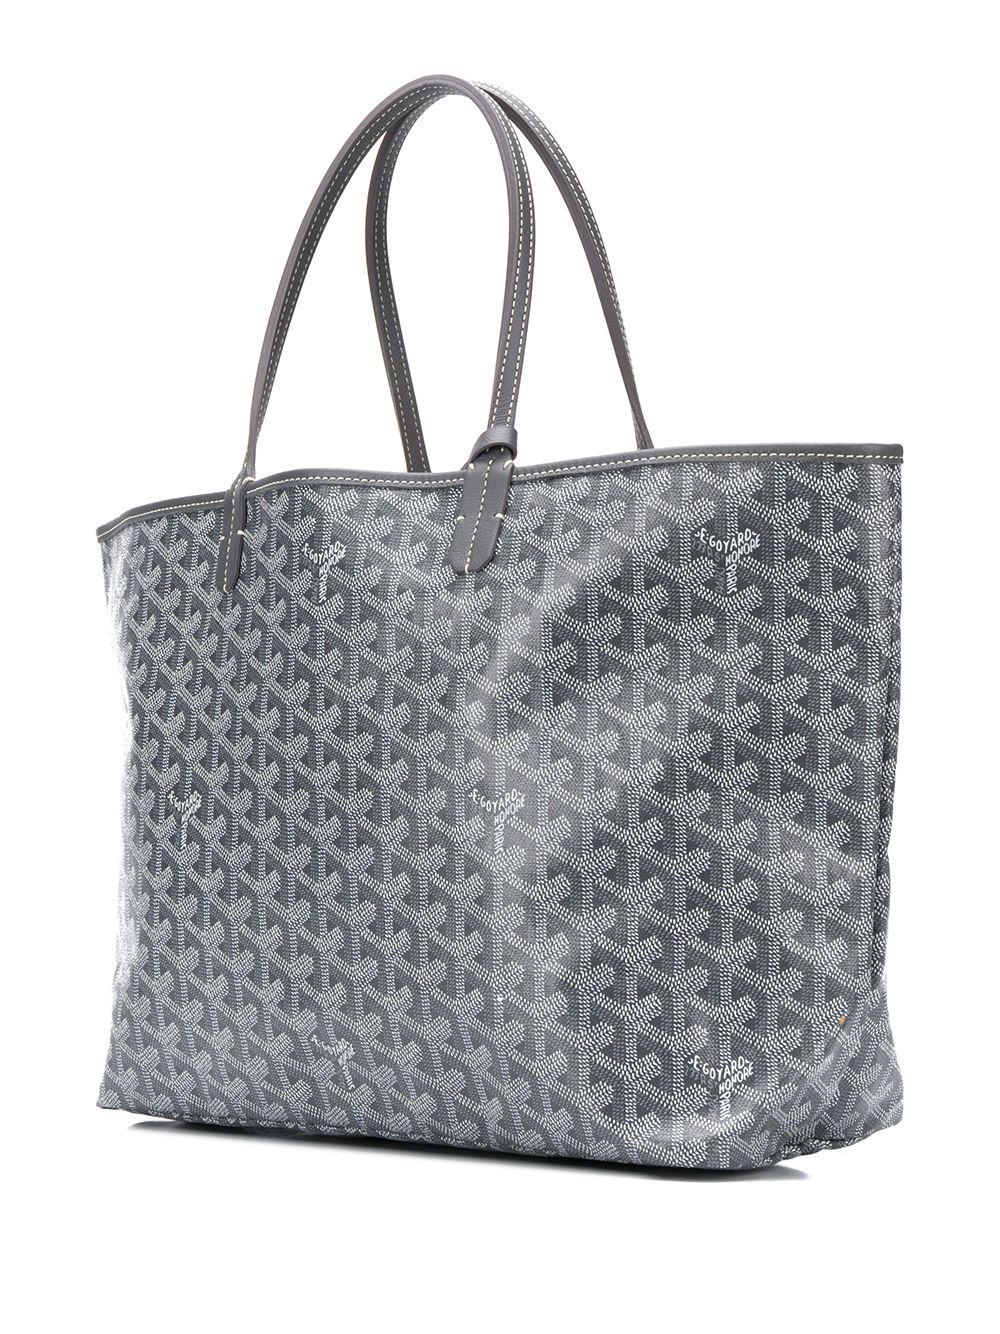 A handbag to truly set your heart aflutter, this customised Goyard St Louis tote bag derives from our Emotional Baggage collection. Its grey monogram leather is vitalised by a flurry of hand-painted butterflies, in a mix of refined luxury and